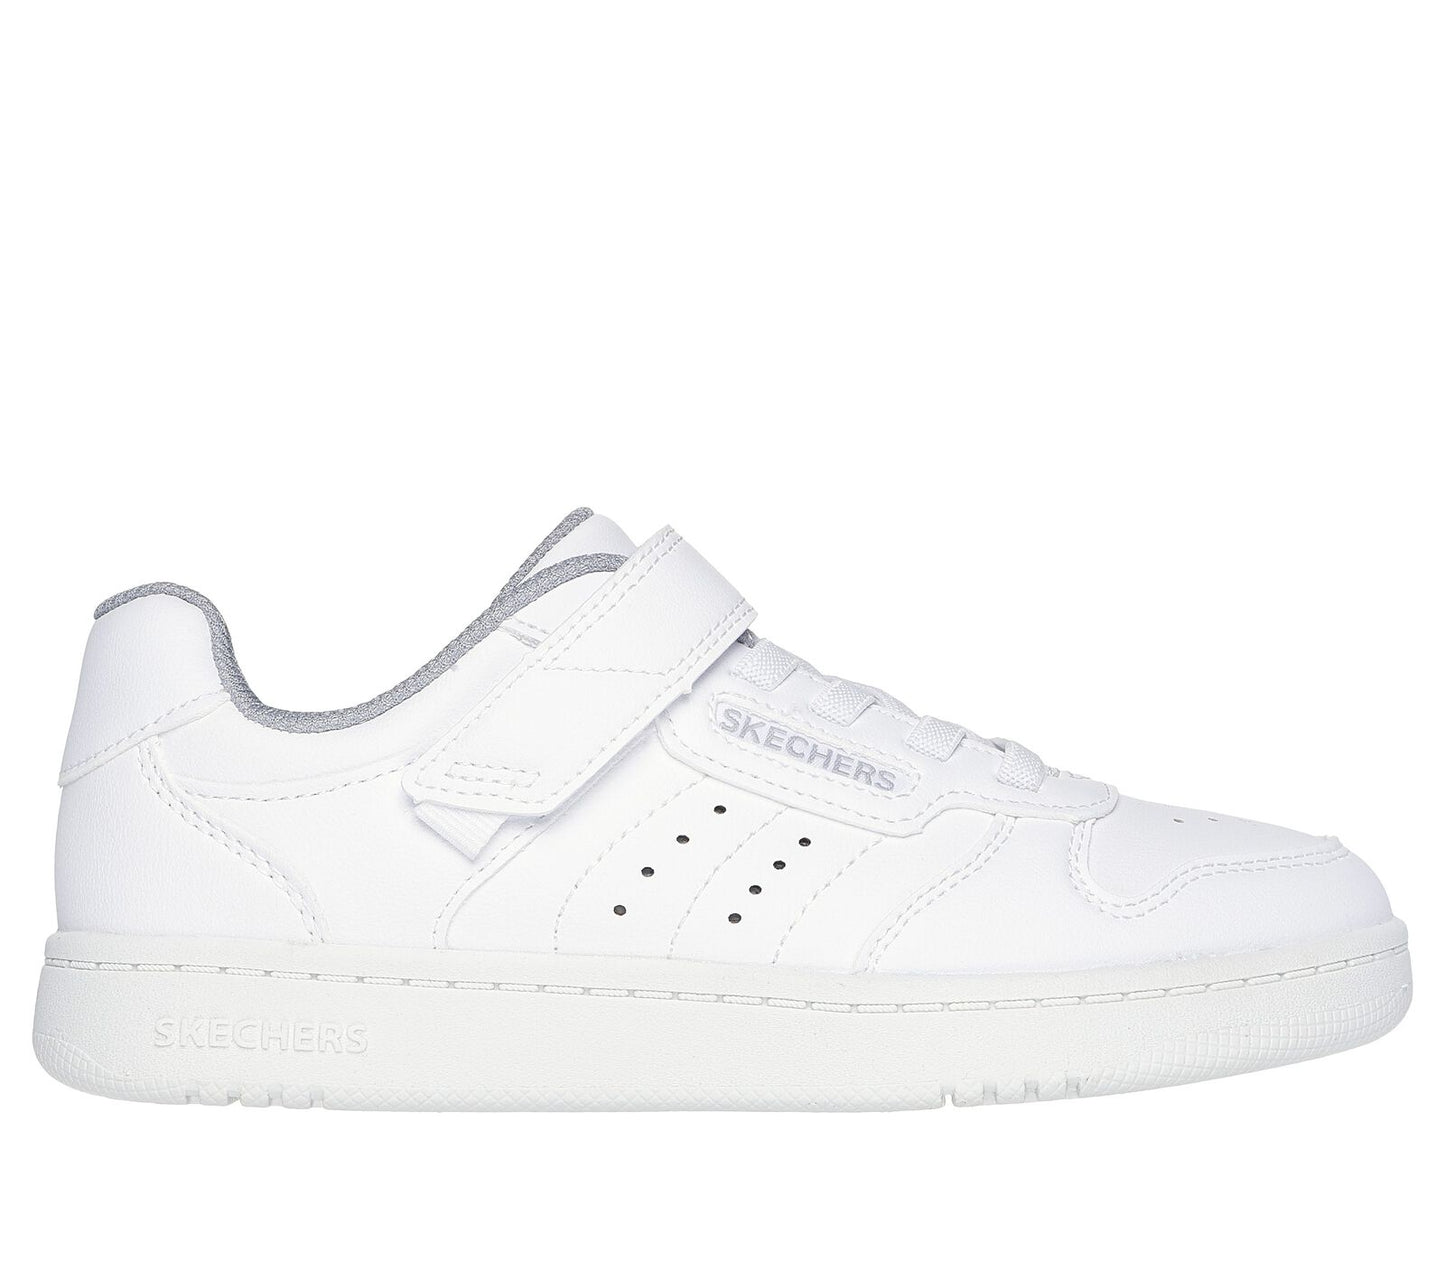 Skechers Quick Street, a sporty white trainer with grey lining, featuring the Skechers logo. Velcro fastening with flat stretch bungee laces. Right side view.